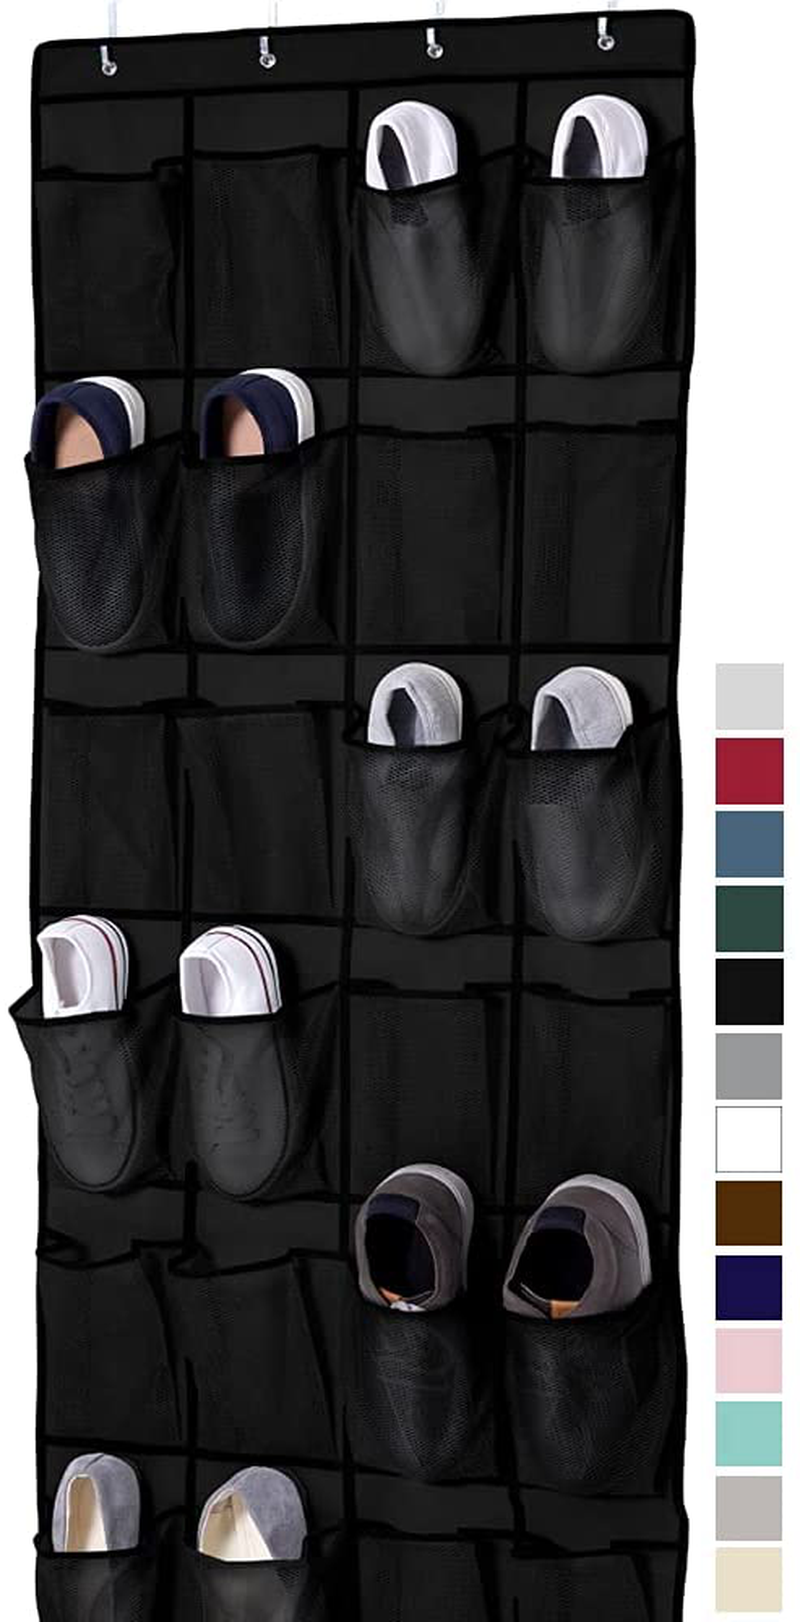 Gorilla Grip Large 24 Pocket Shoe Organizer, Breathable Mesh, Holds Up to 40 Pounds, Sturdy Hooks, Space Saving, Over Door, Storage Rack Hangs on Closets for Shoes, Sneakers, Accessories, Hunter Green